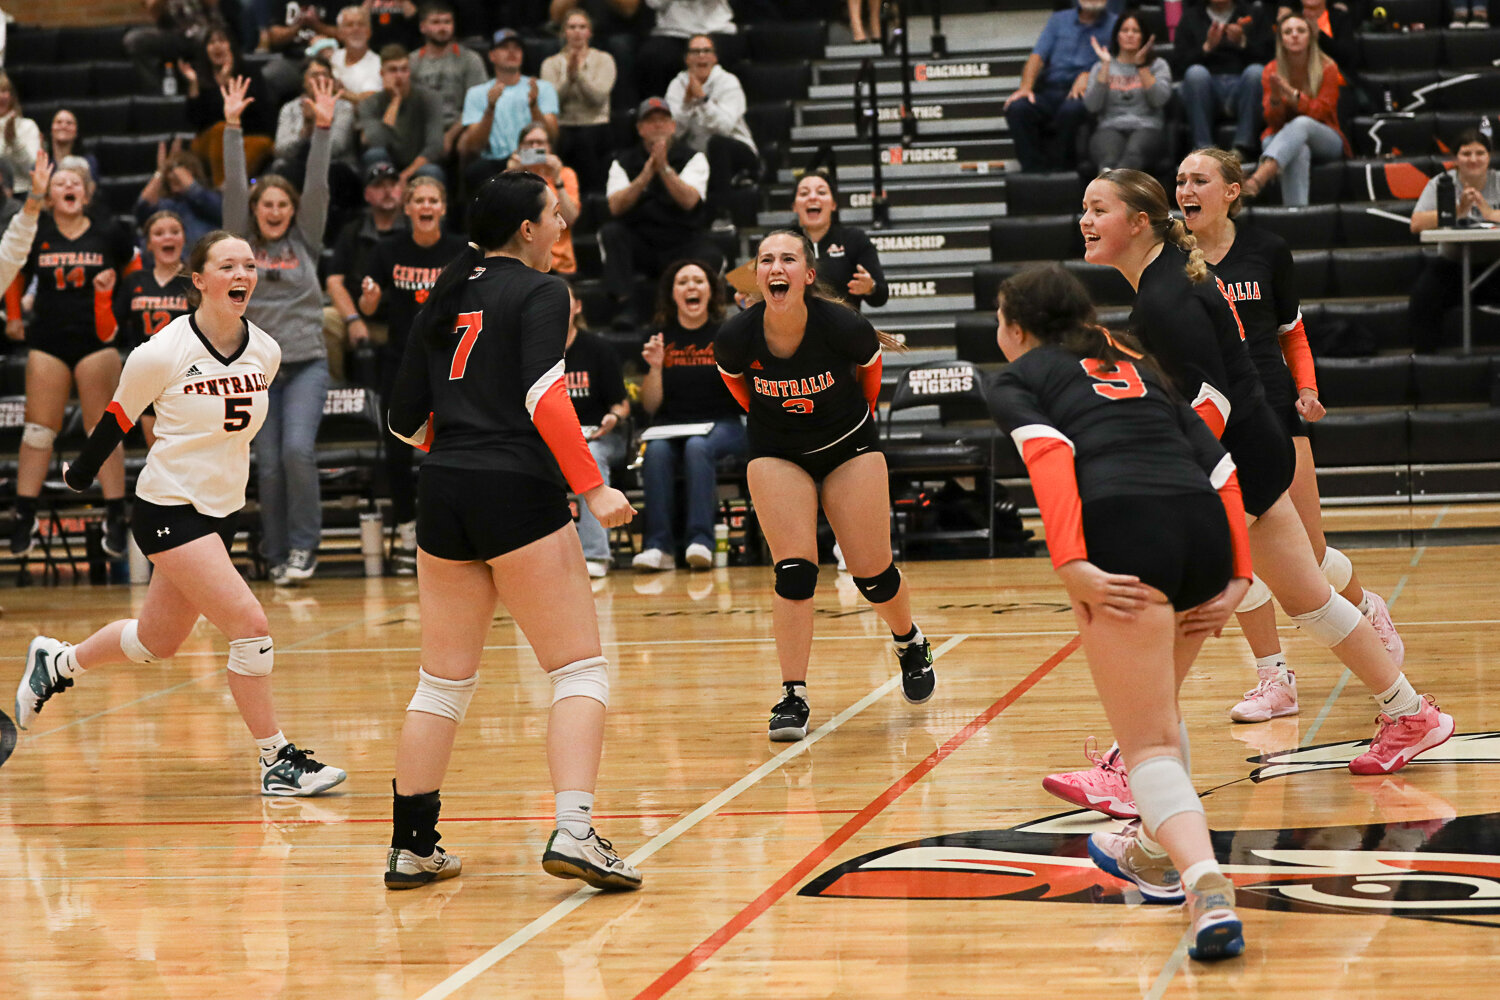 Centralia celebrates a point during the first set of its win over W.F. West on Sept. 21.